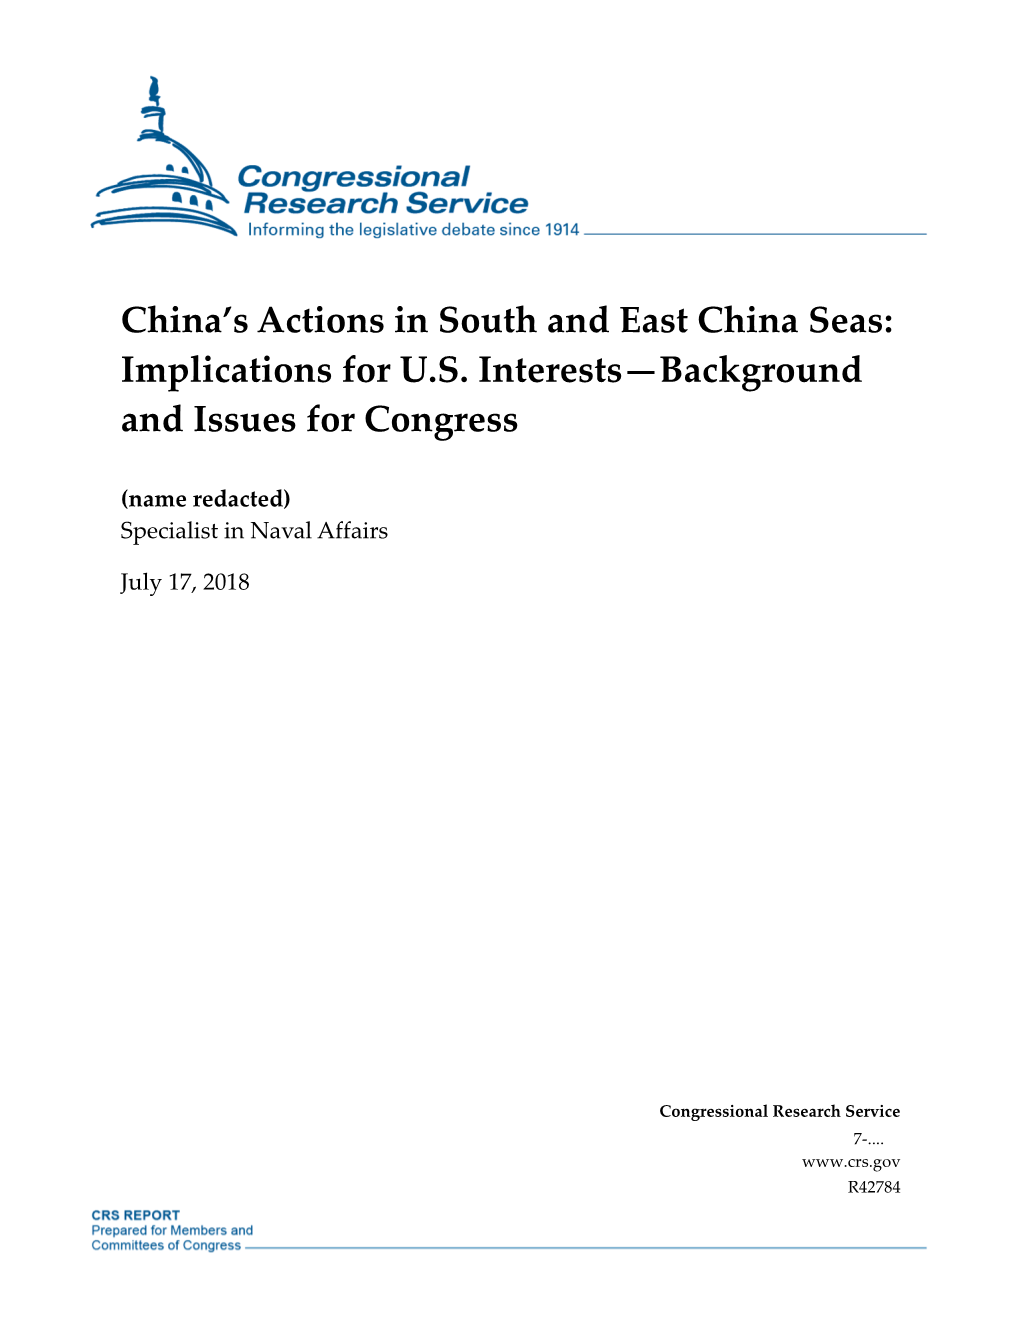 China's Actions in South and East China Seas